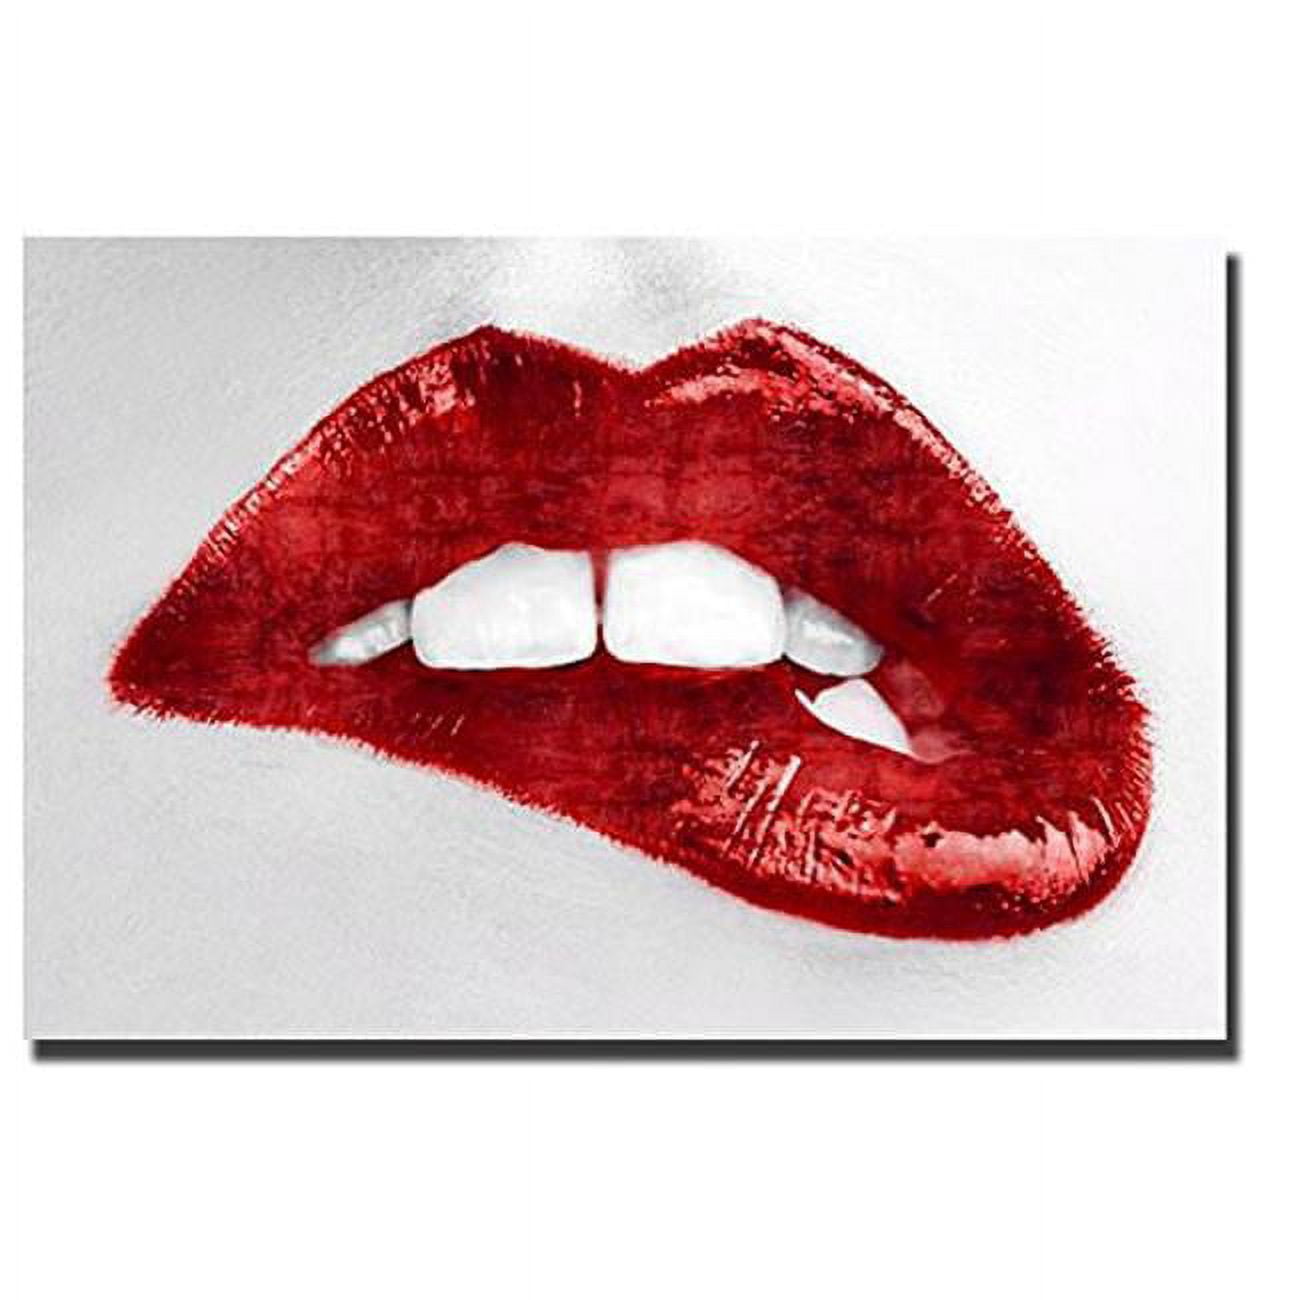 2436k277tg Luscious Red By Sarah Mcguire Custom Gallery-wrapped Canvas Giclee Art - Ready To Hang, 24 X 36 X 1.5 In.